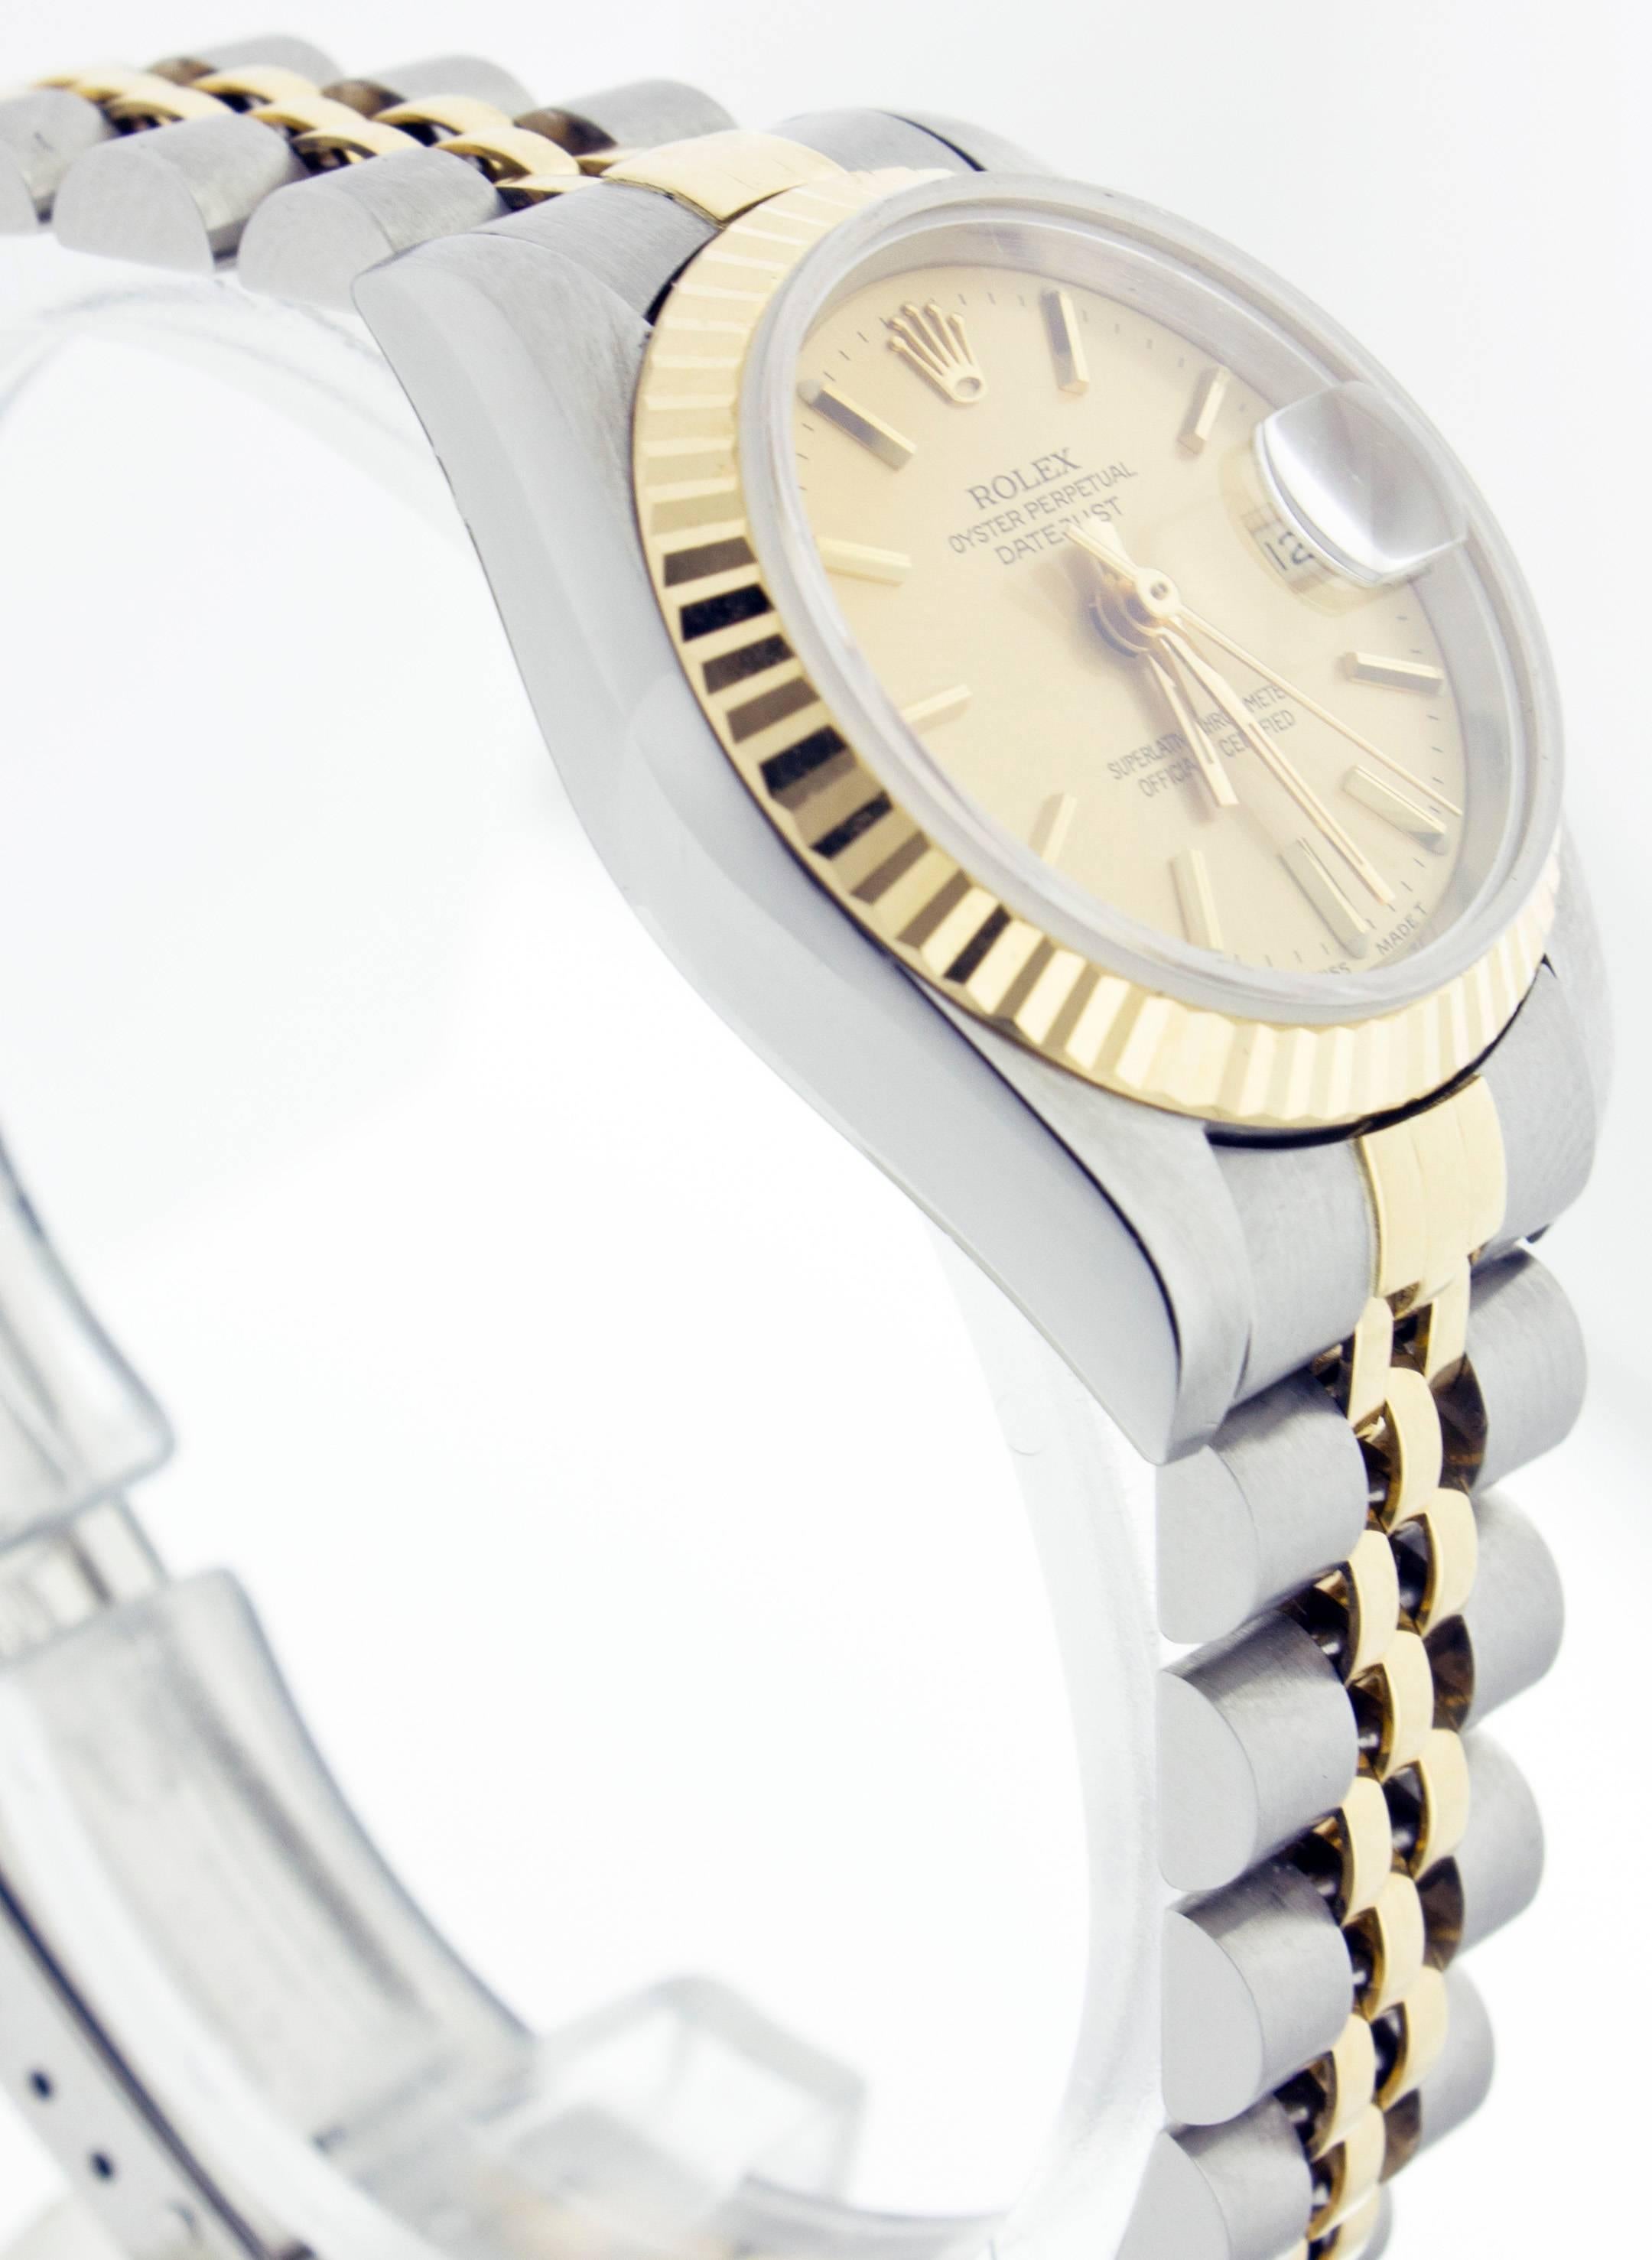 Brand: Rolex
Model: Datejust 69173
Case: Rolex Two Tone 26mm
Bezel: 18K Yellow Gold Fluted
Dial: Champagne Index 
Bracelet: Rolex Two Tone Jubilee (Yellow Gold & Stainless Steel) 
Bracelet Length: Will Fit Up To 6